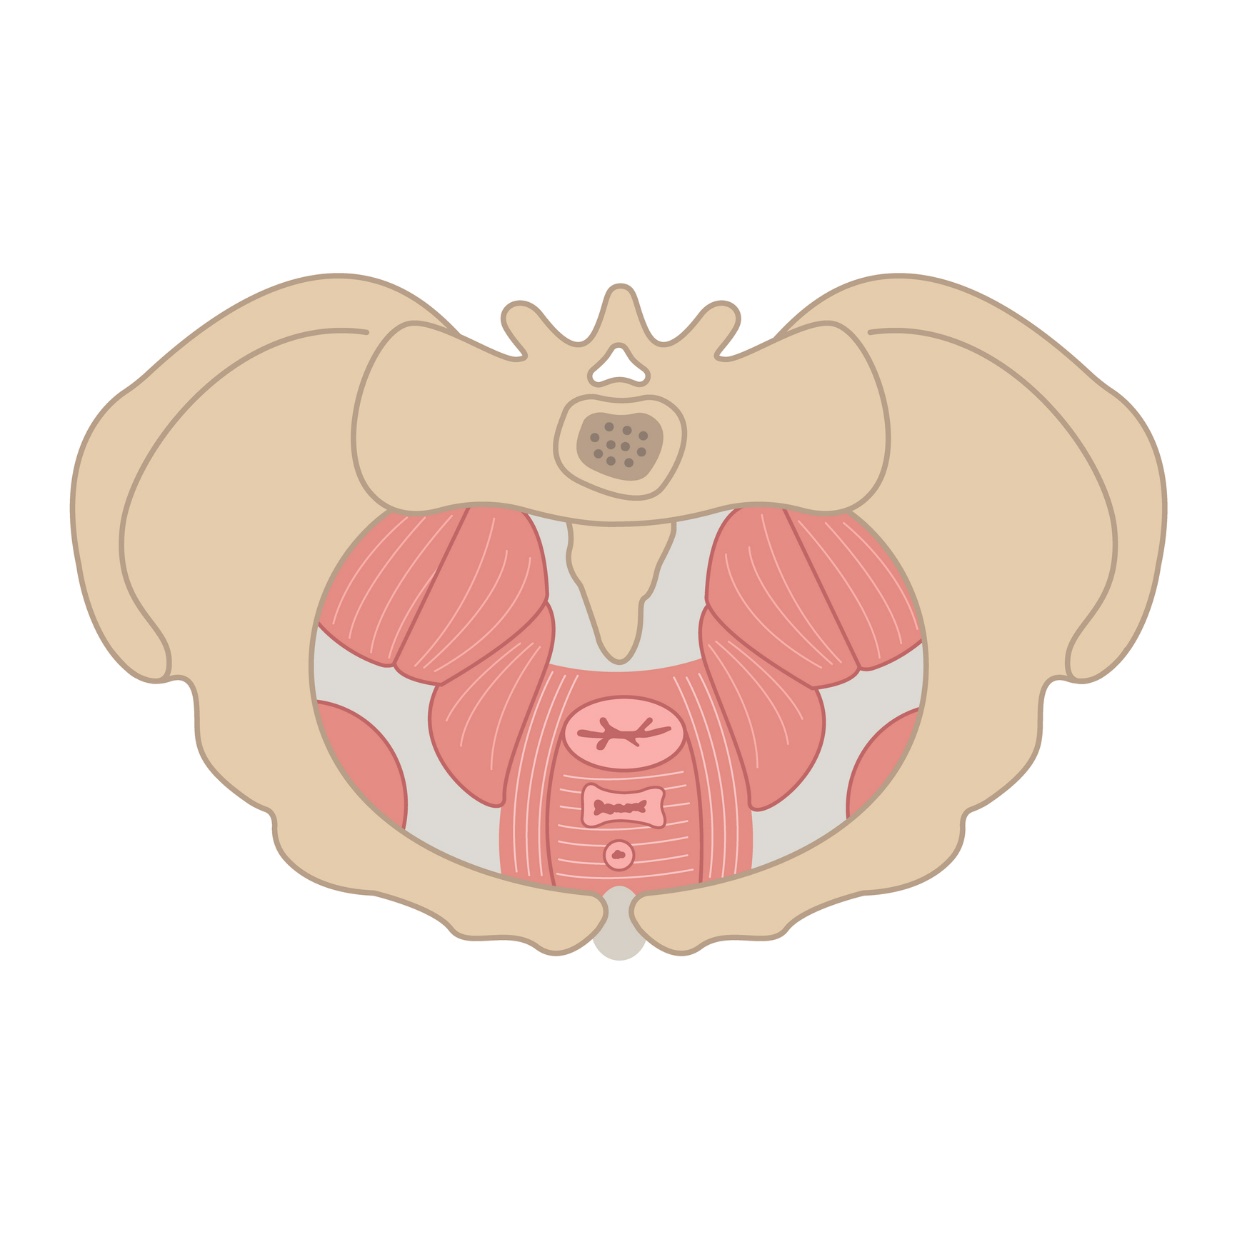 Pelvic floor muscles and muscle sphincters. Female pelvis - anatomical view from above